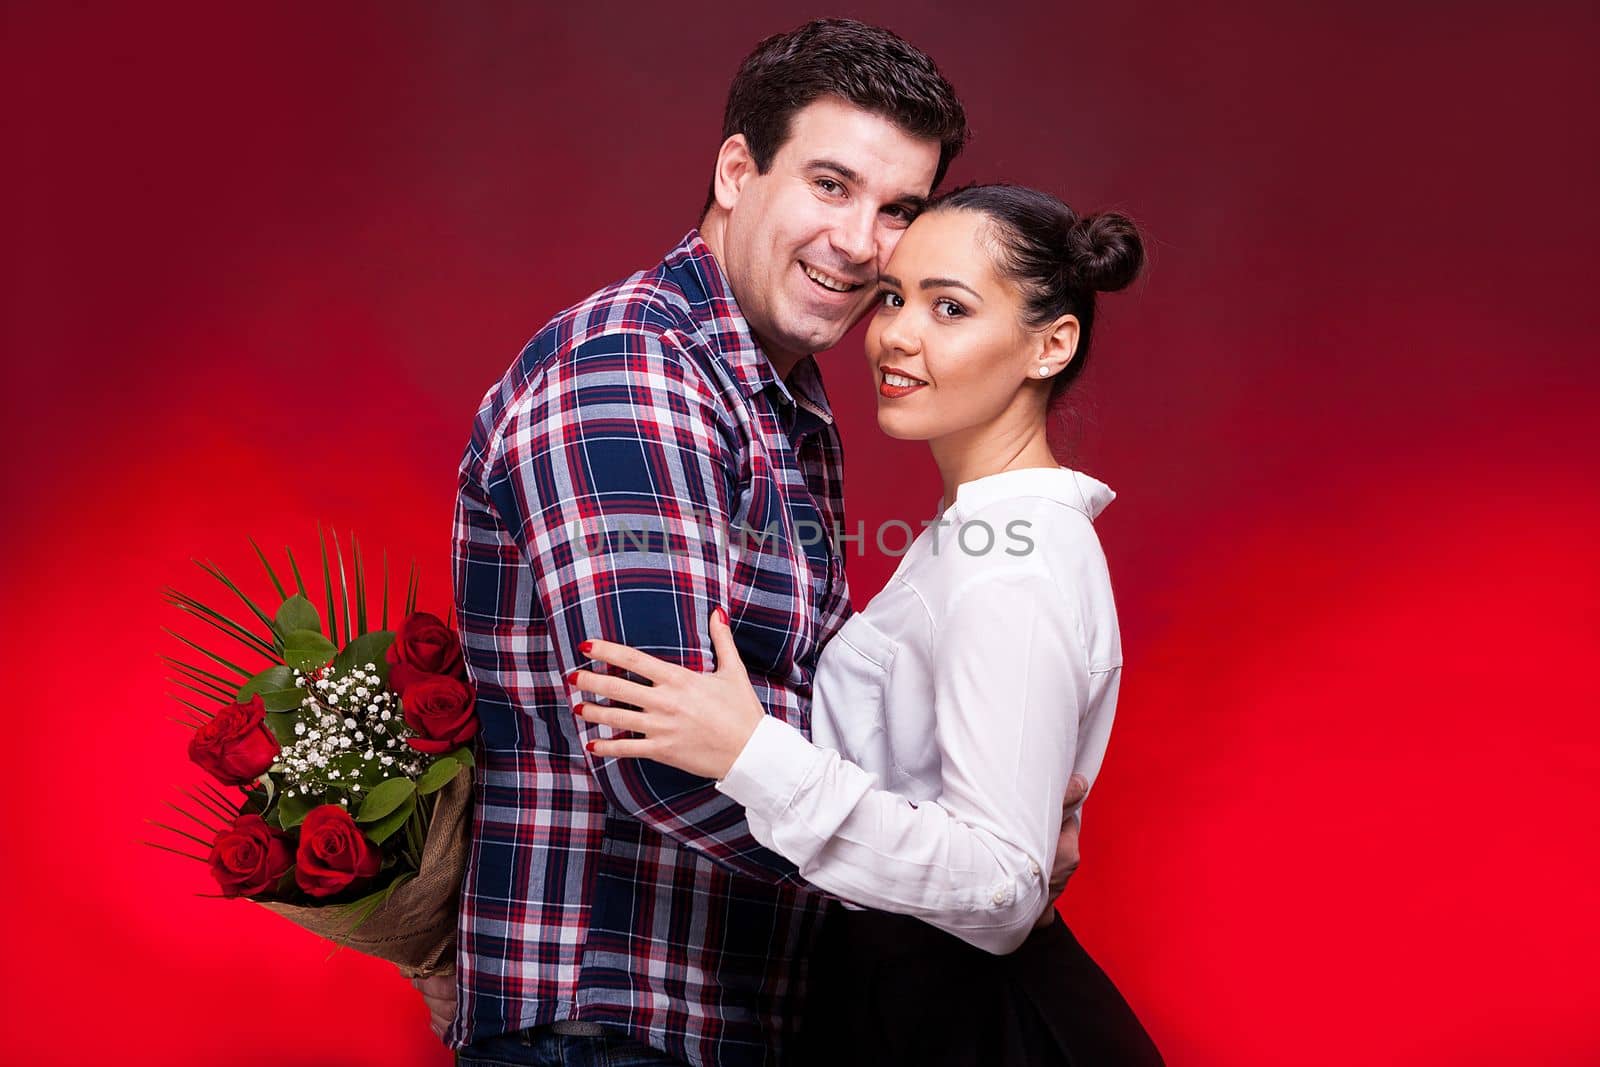 Man with a roses bouquet at his back on a first date embracing a gorgeous girl. Red background and studio photo